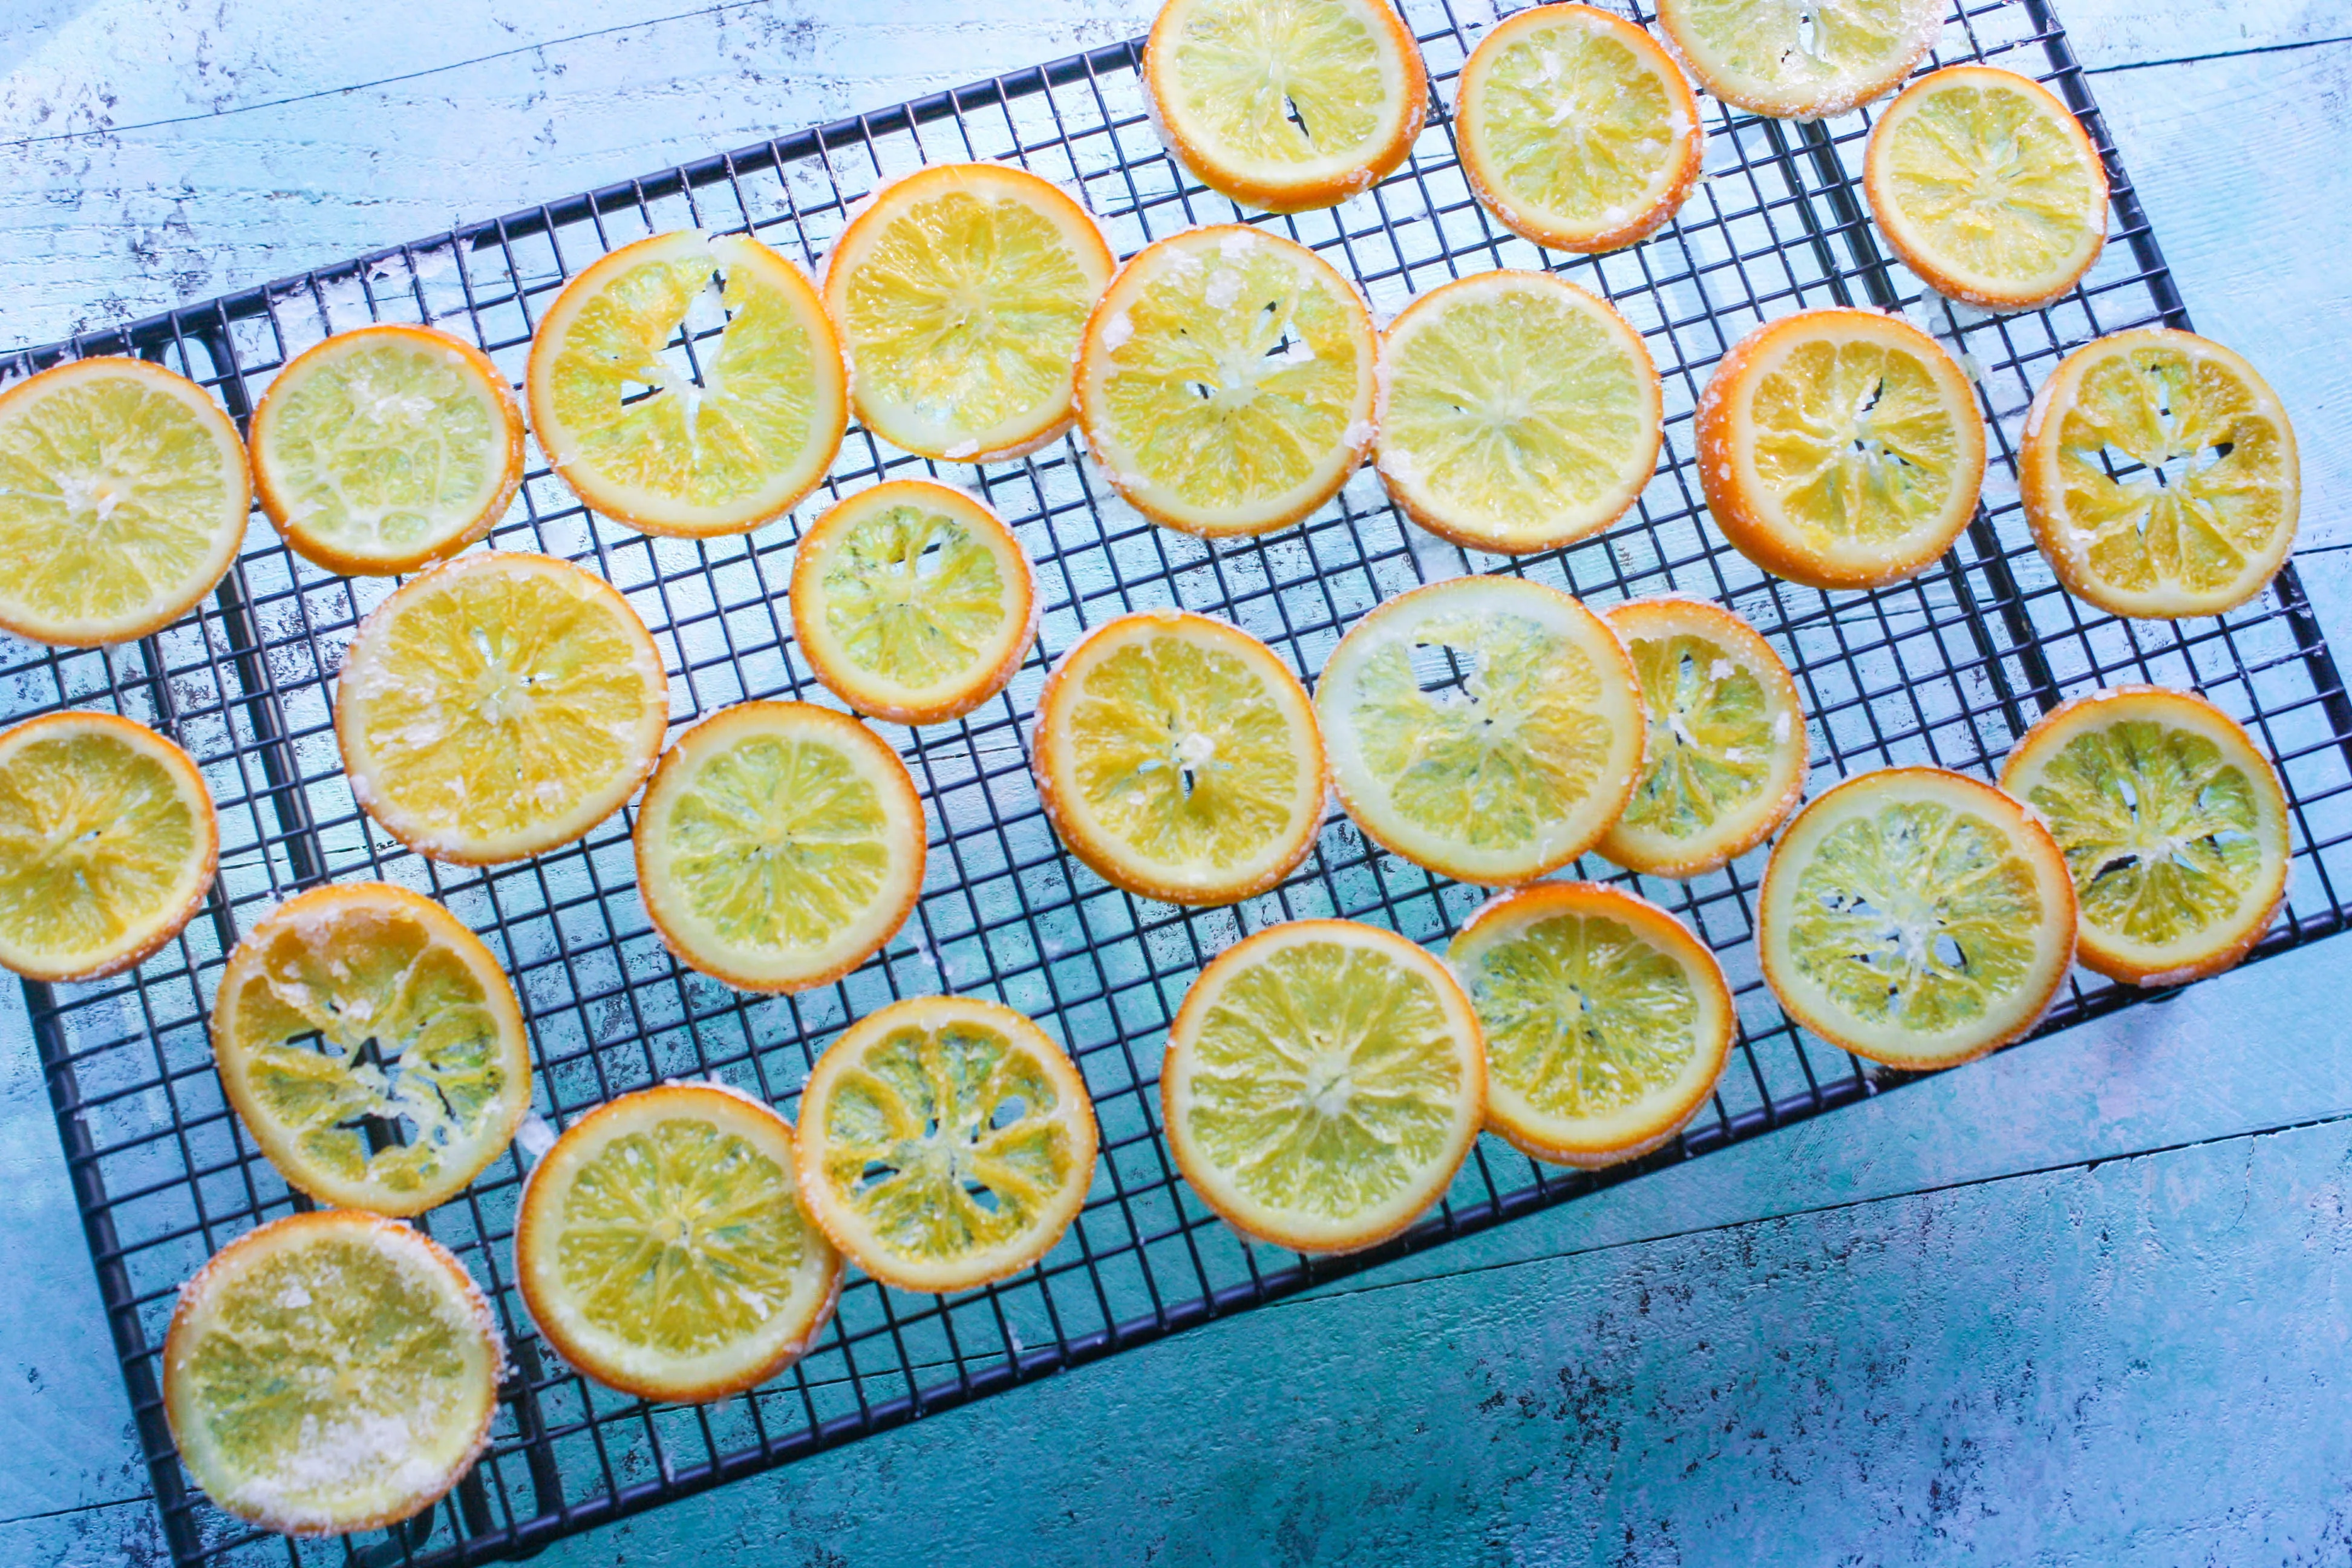 Candied Orange Slices are a bright and cheerful treat. You'll love these candied oranges, for sure!